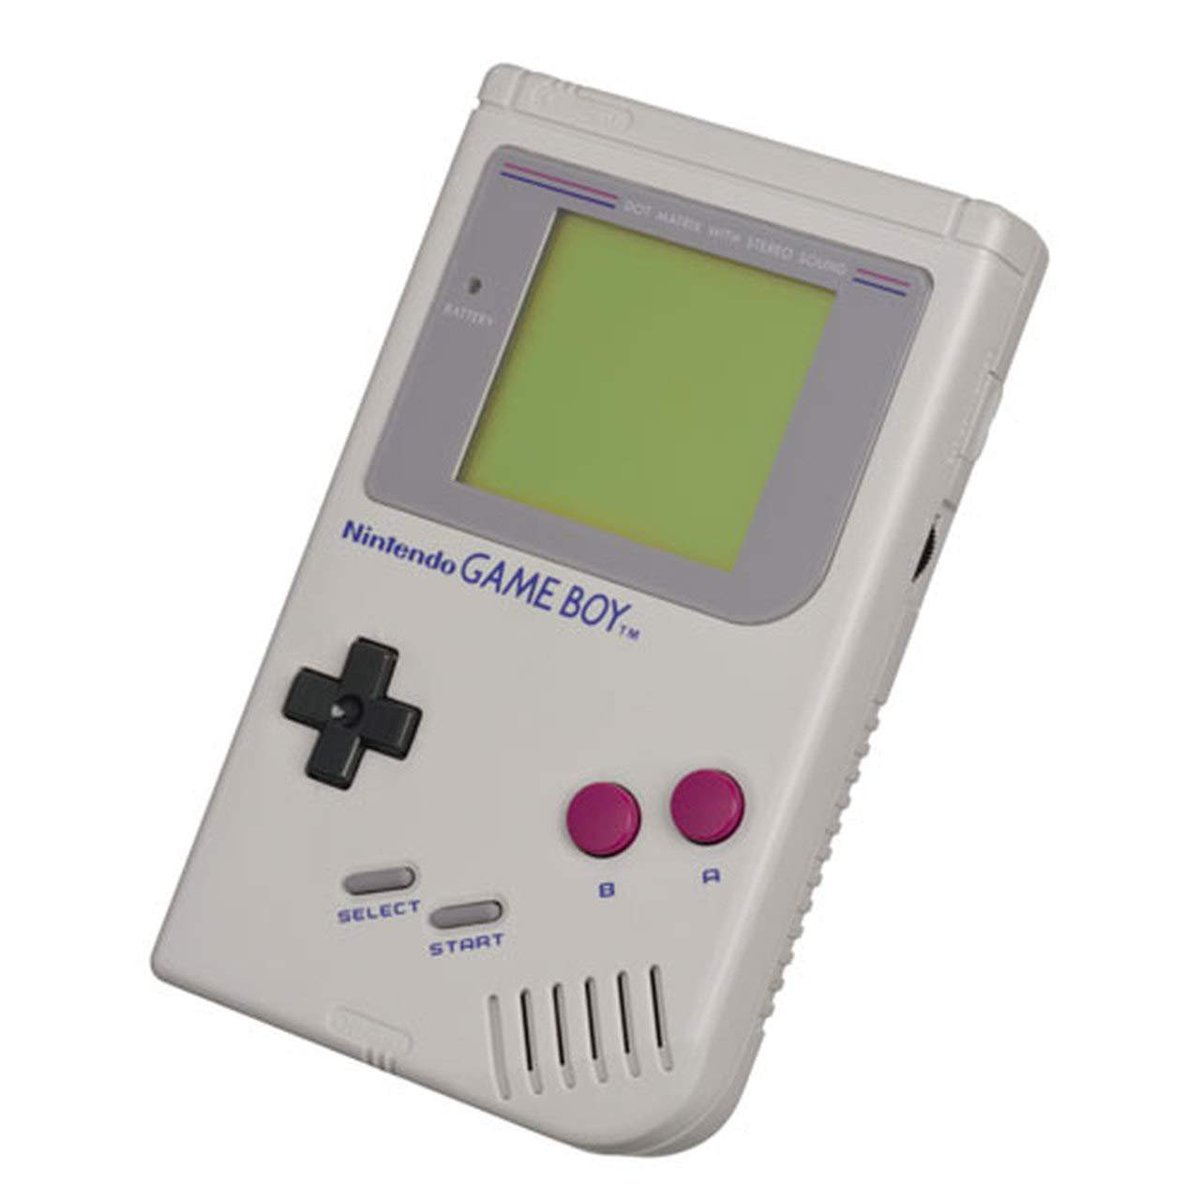 Well, here's a game boy that's turned off.Oh look, the screen is light. What does that tell us? It tells us the default state for this display is to pass light through, not to block it.